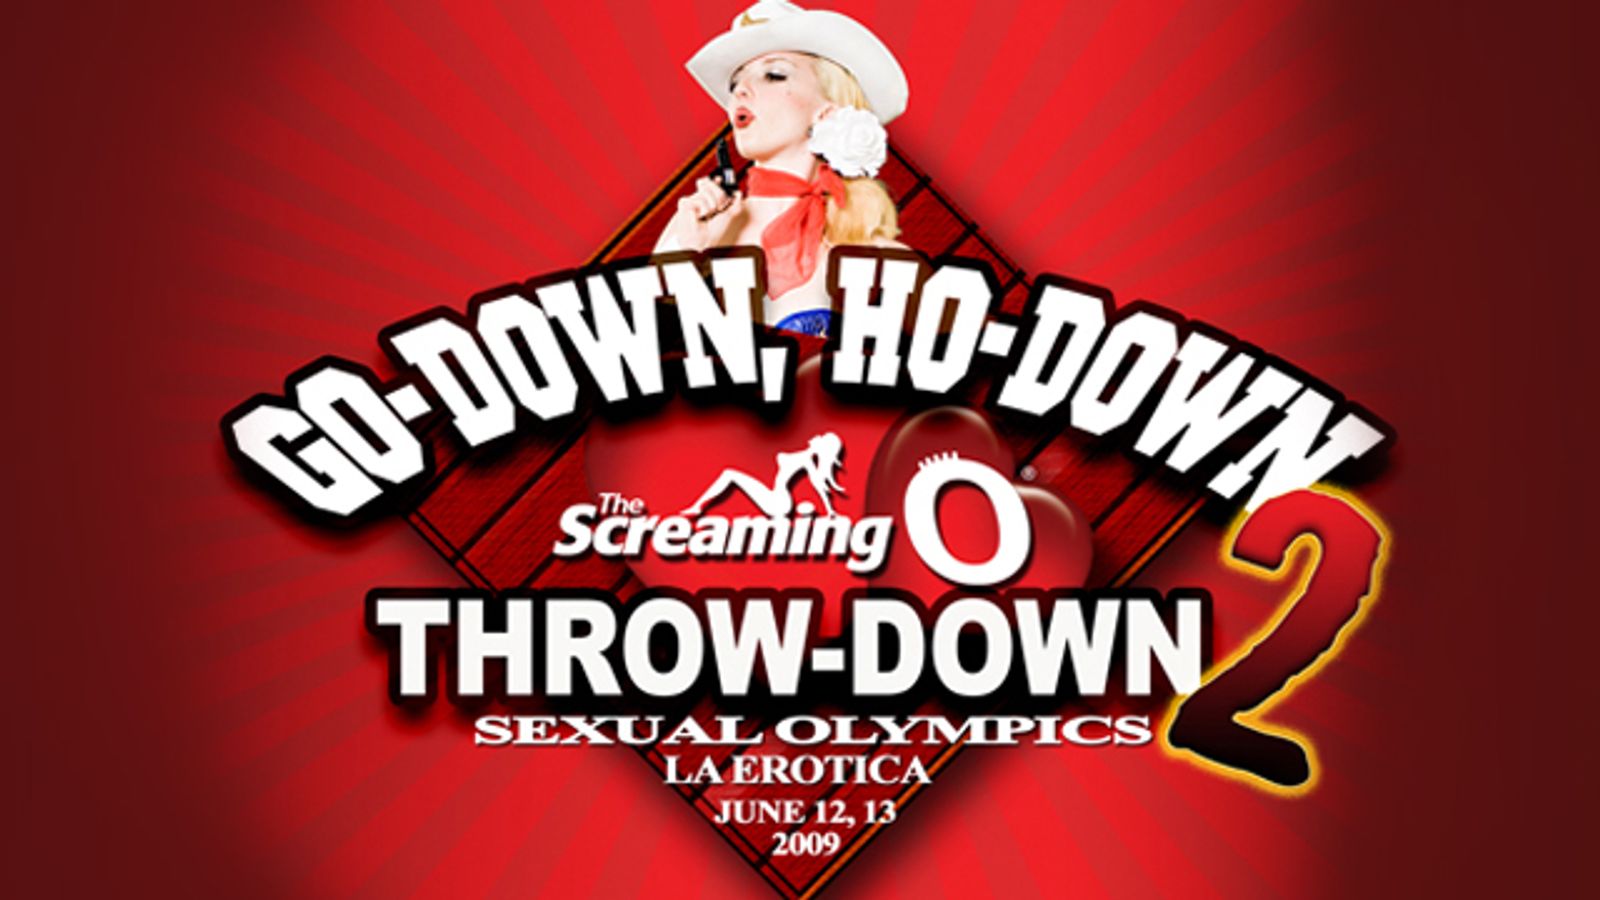 Screaming O to Hold 2nd Annual Ho-Down at Erotica LA